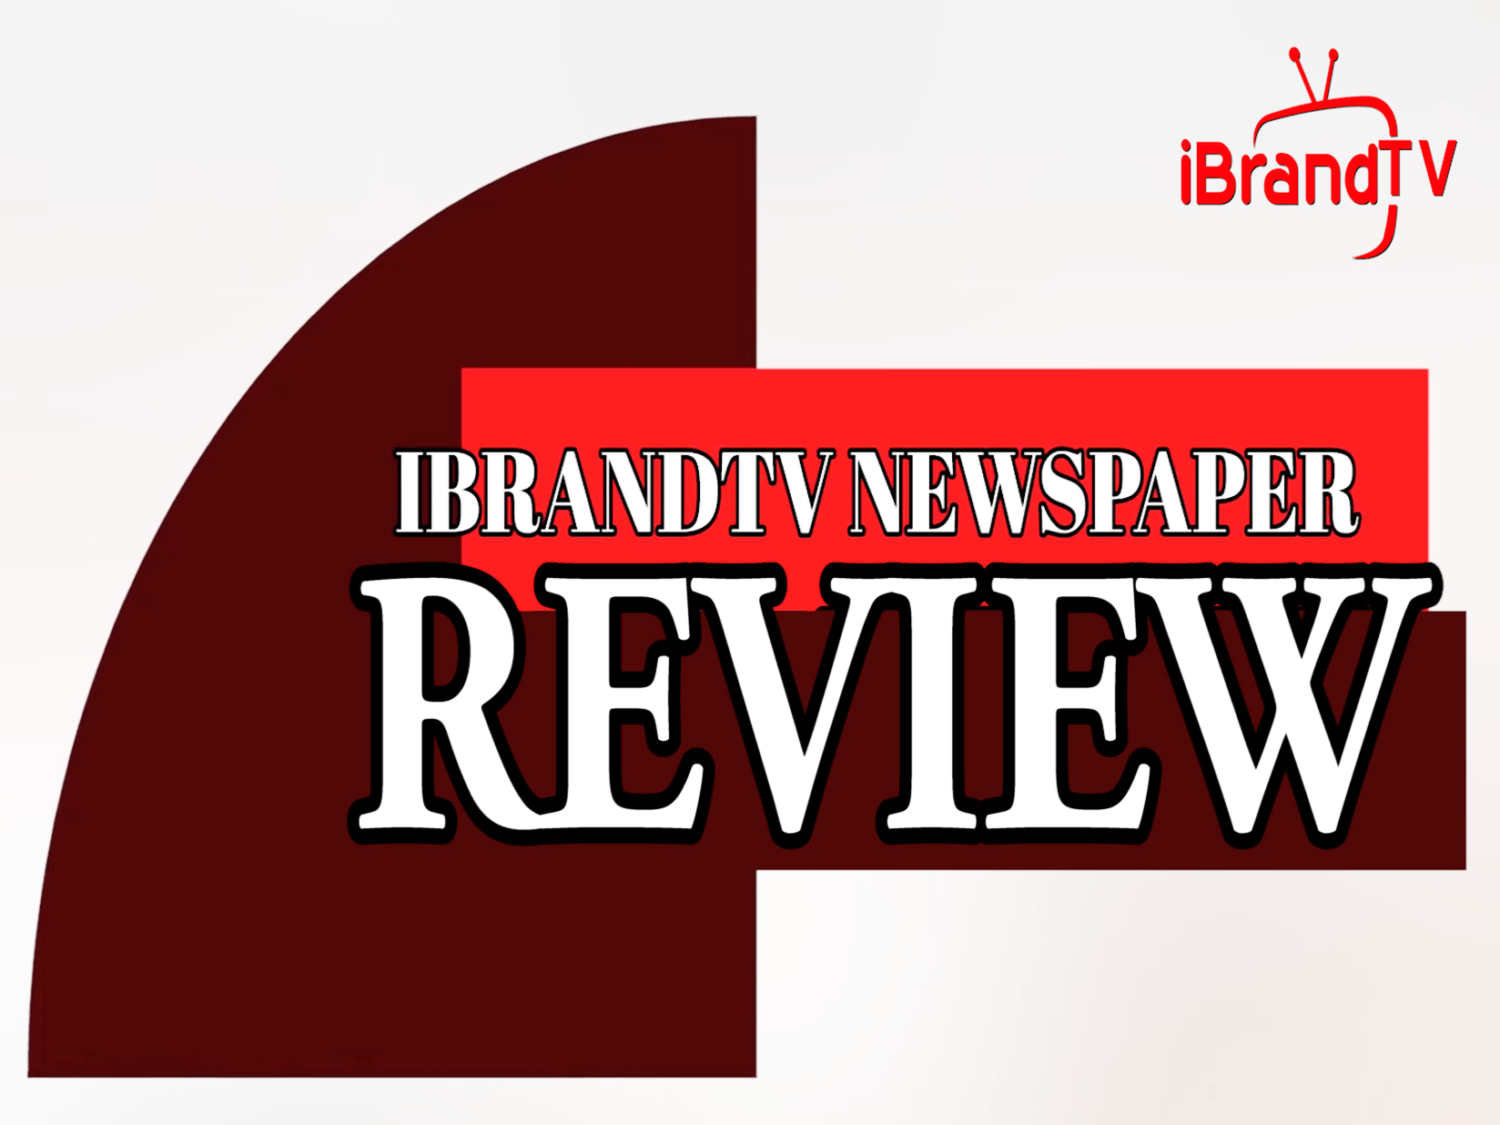 Allnews Nigeria brings you compilations and roundup of the top Nigerian newspaper headlines online for today on. iBrandTV.